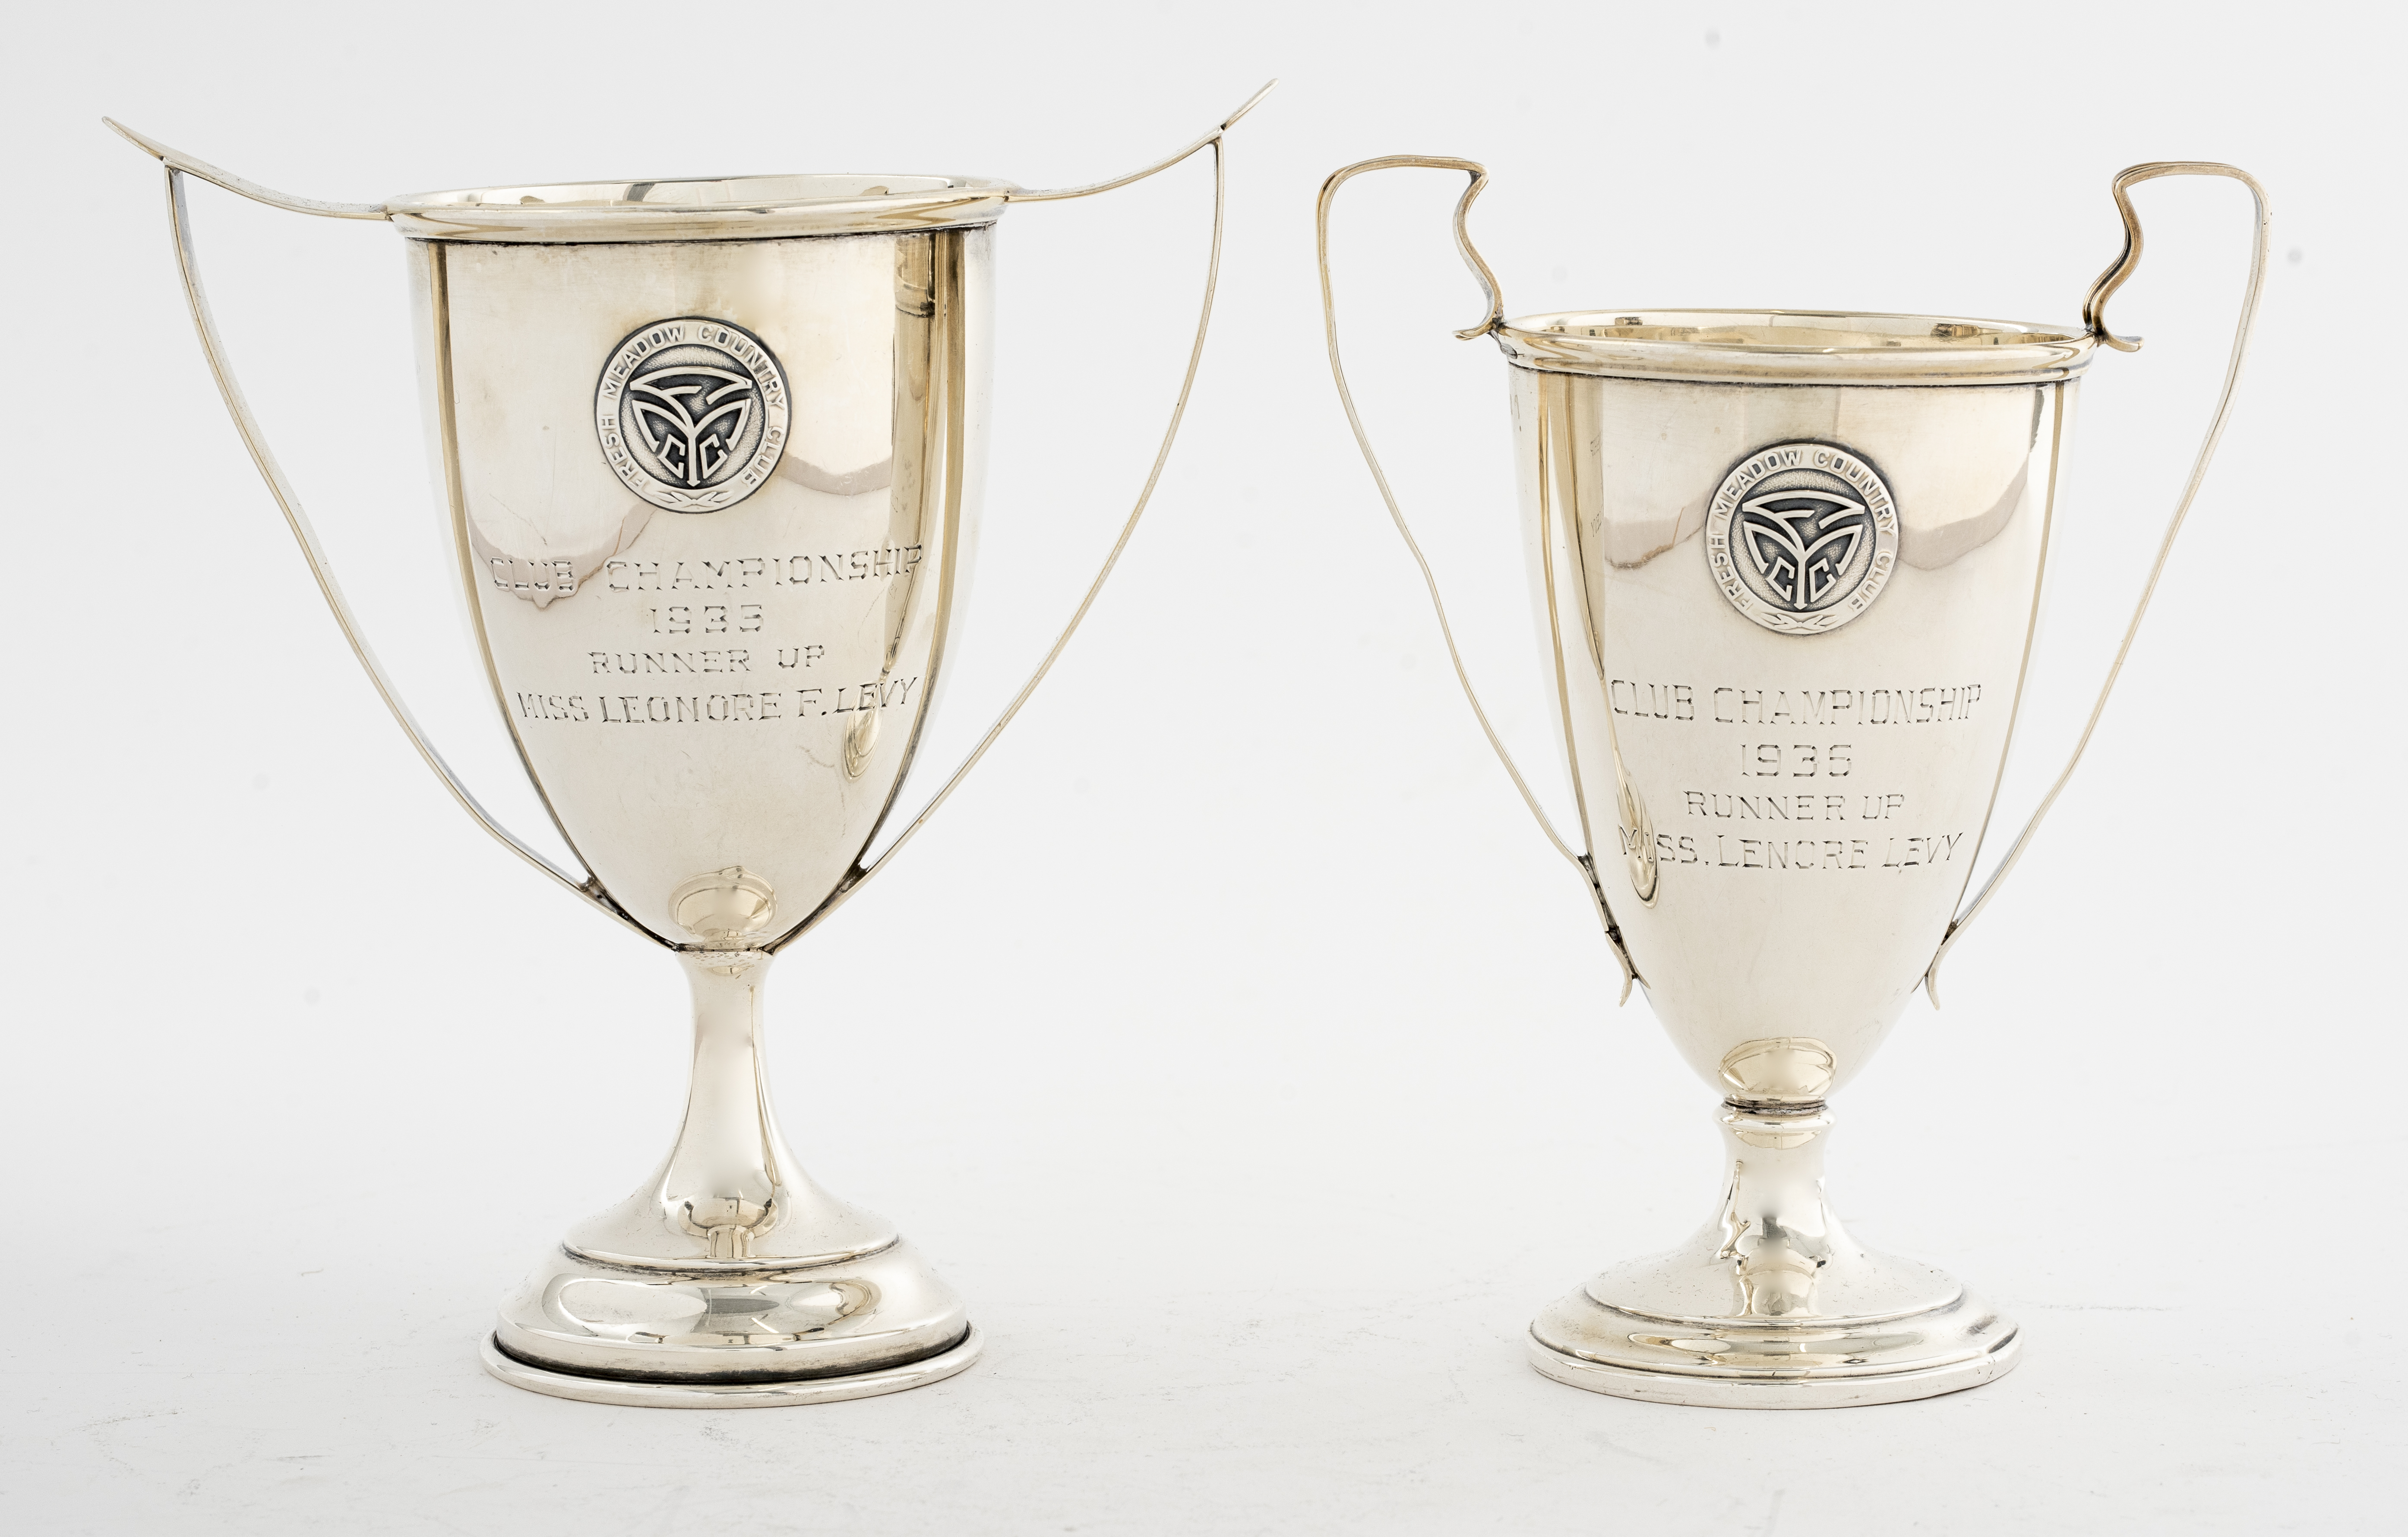 TWO STERLING SILVER TROPHY CUPS